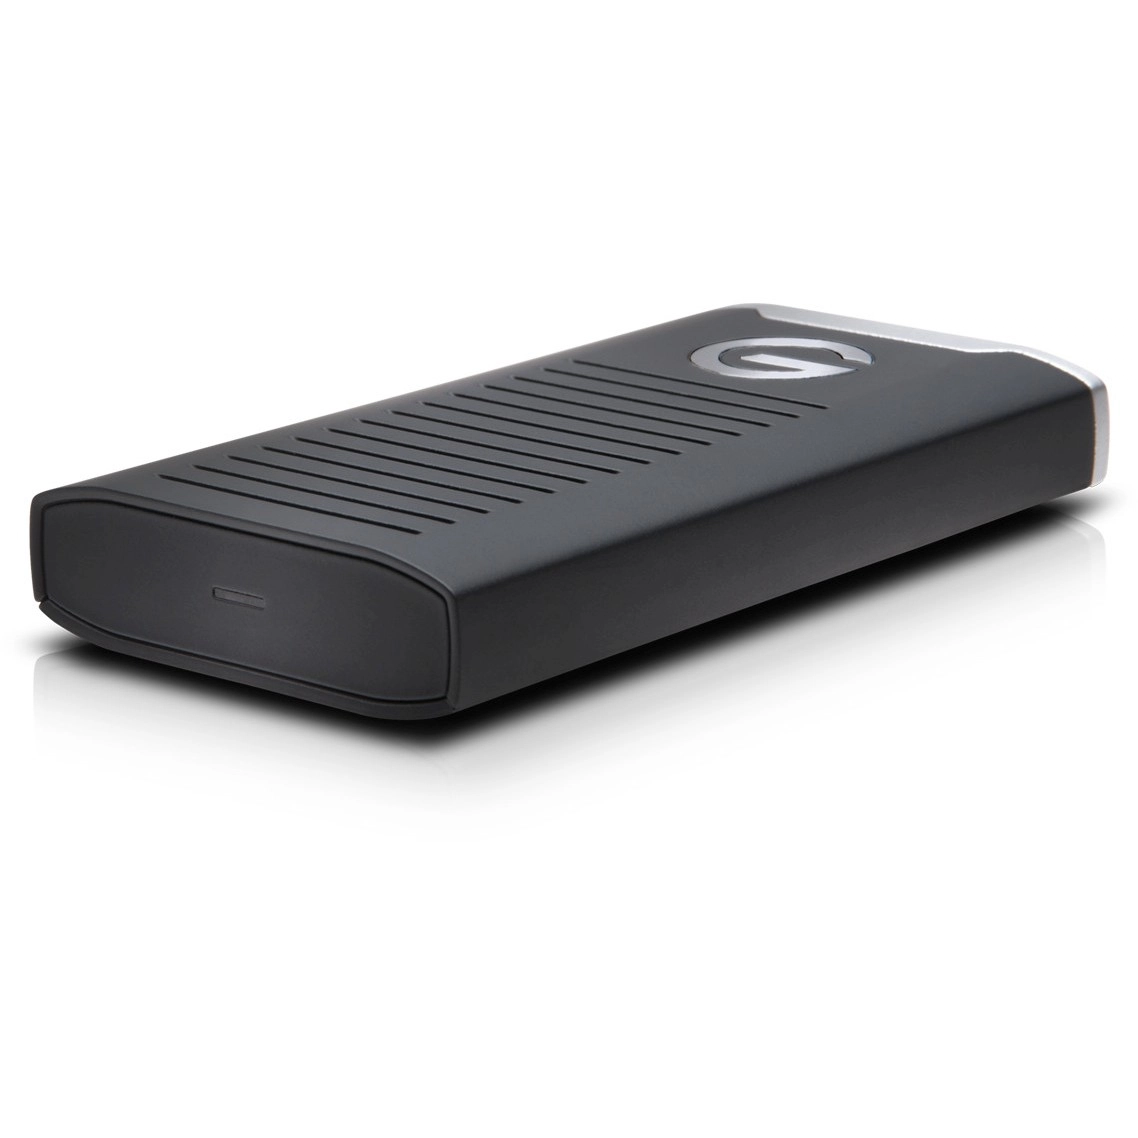 G-Technology G-DRIVE Mobile SSD